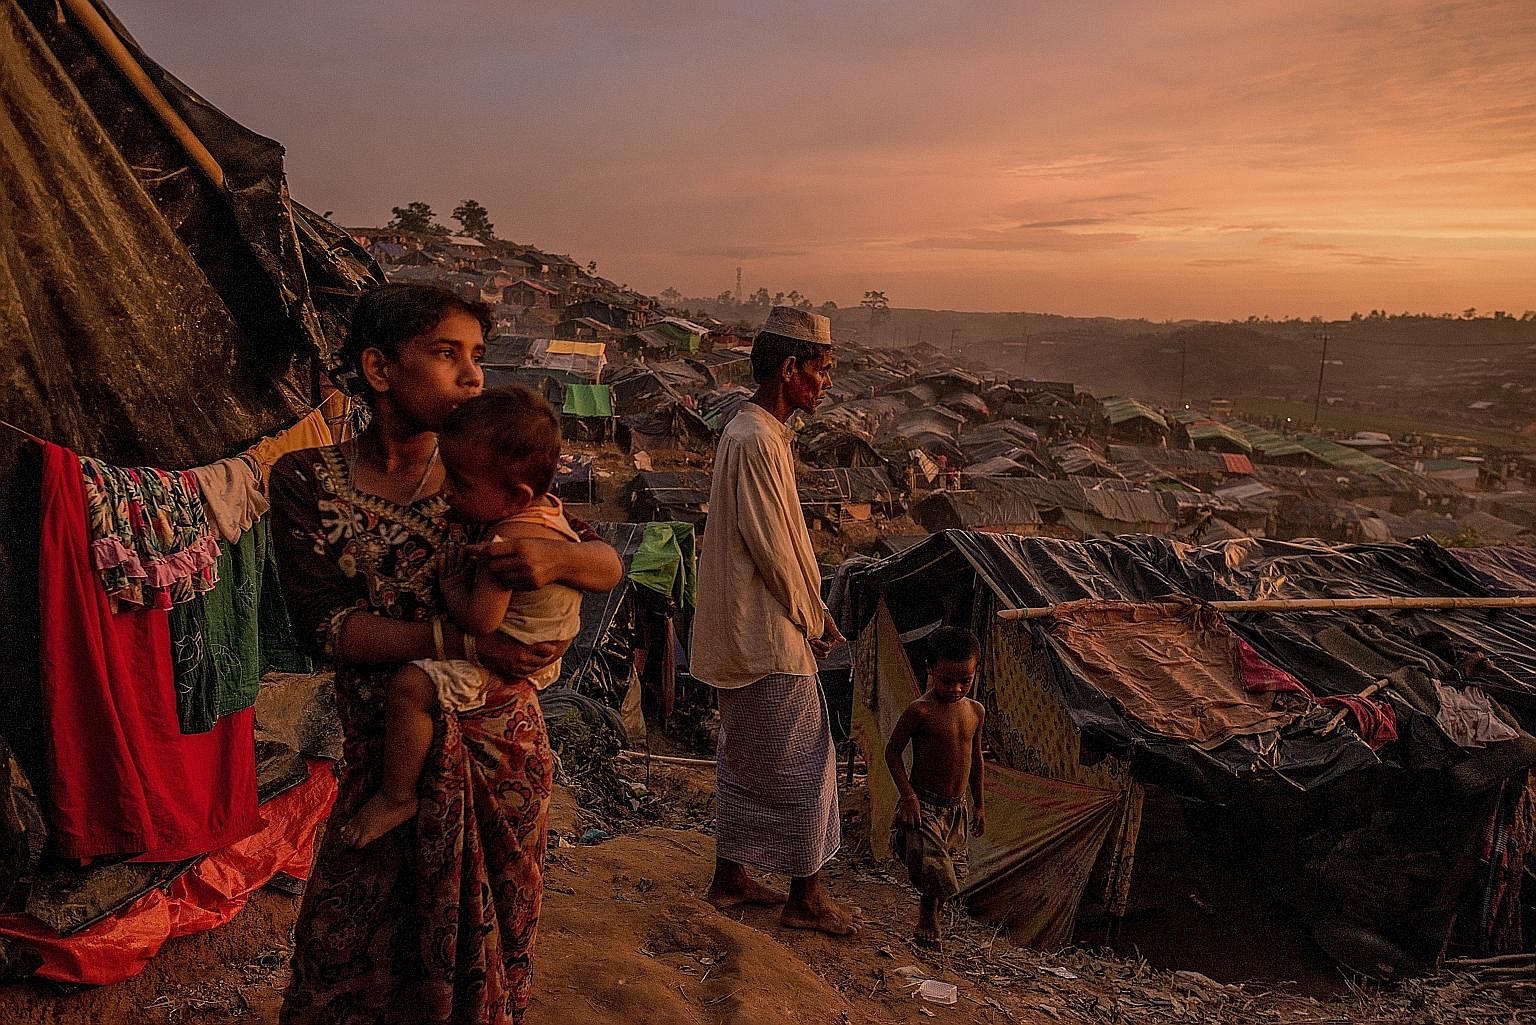 Rohingya refugees in a makeshift camp in Cox's Bazar, Bangladesh, on Wednesday. The US has declared the violence against Myanmar's Muslim minority in Rakhine an act of "ethnic cleansing" and Mr Rex Tillerson said it will pursue accountability through